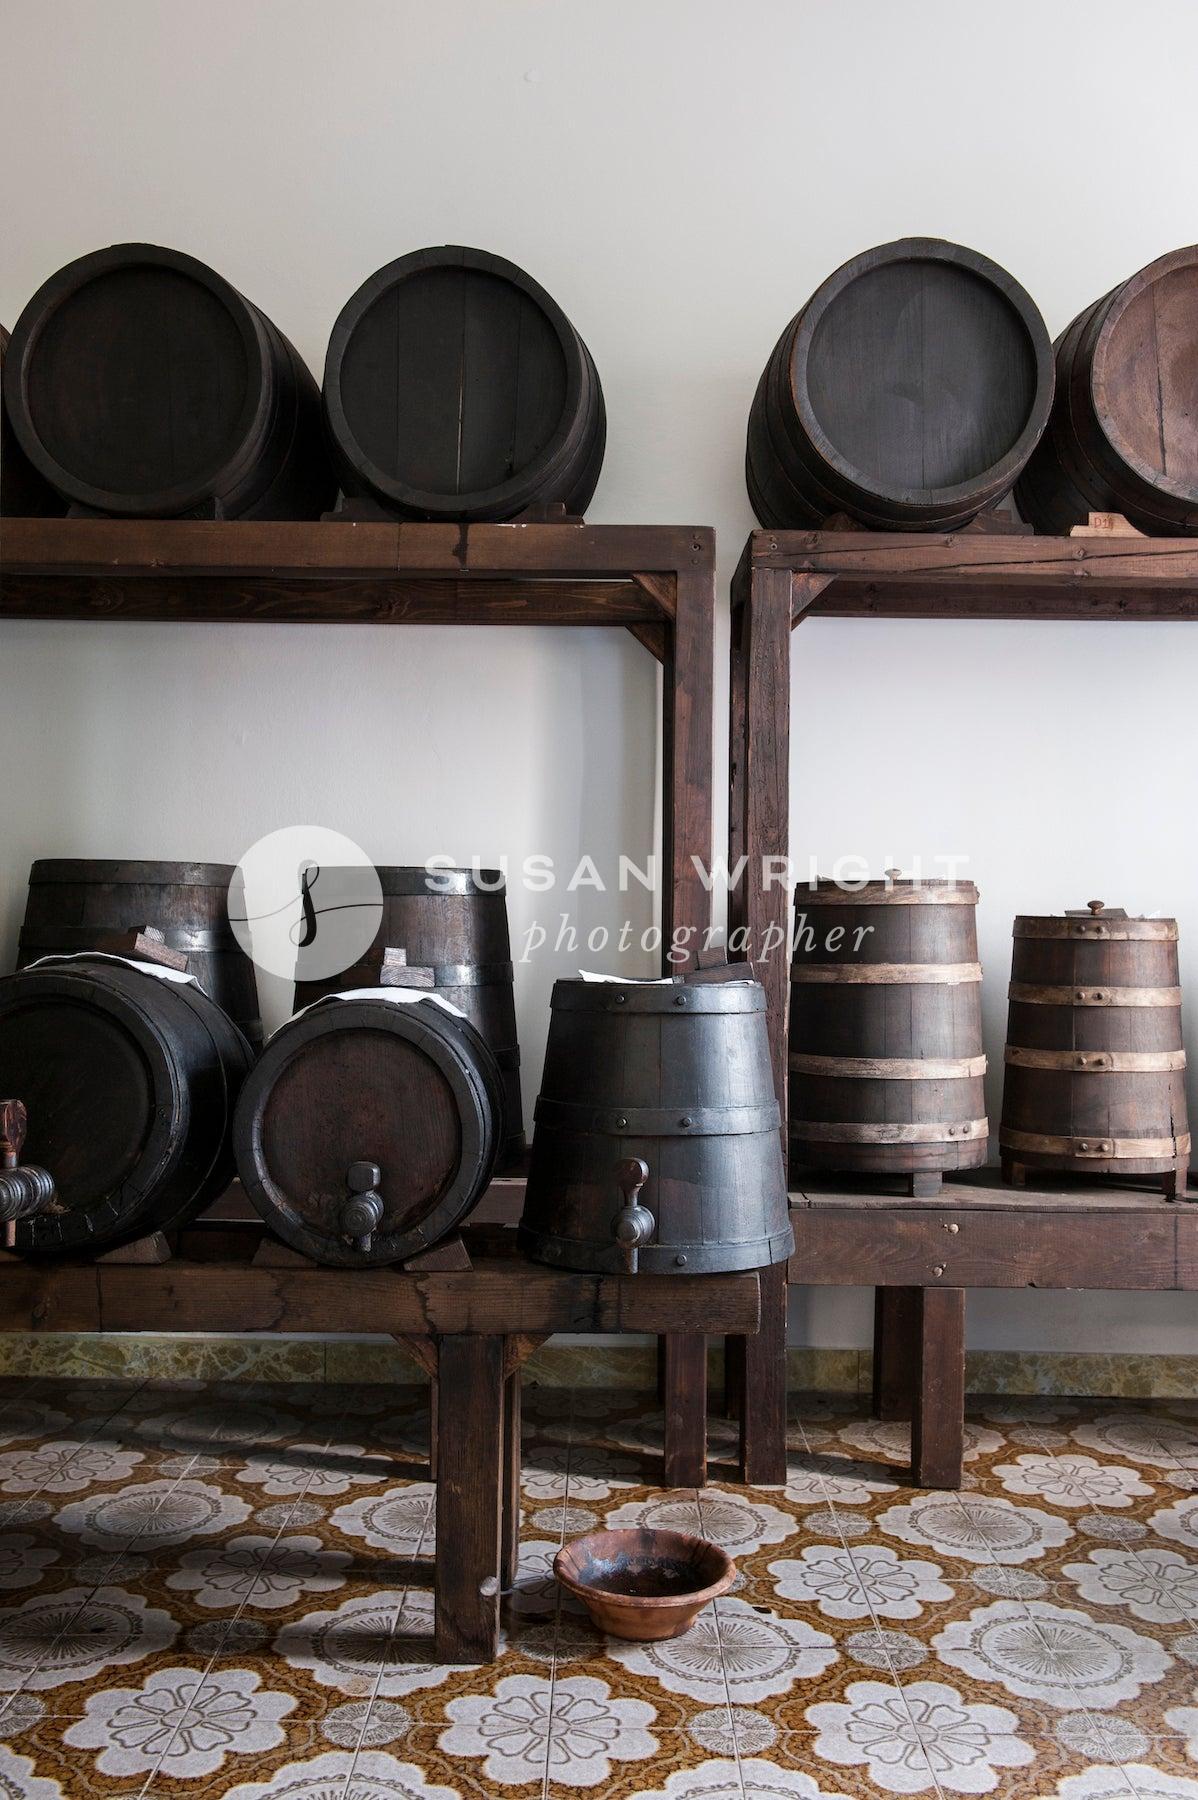 Traditional Balsamic Vinegar of Modena -  by Susan Wright Images - Photo Essays